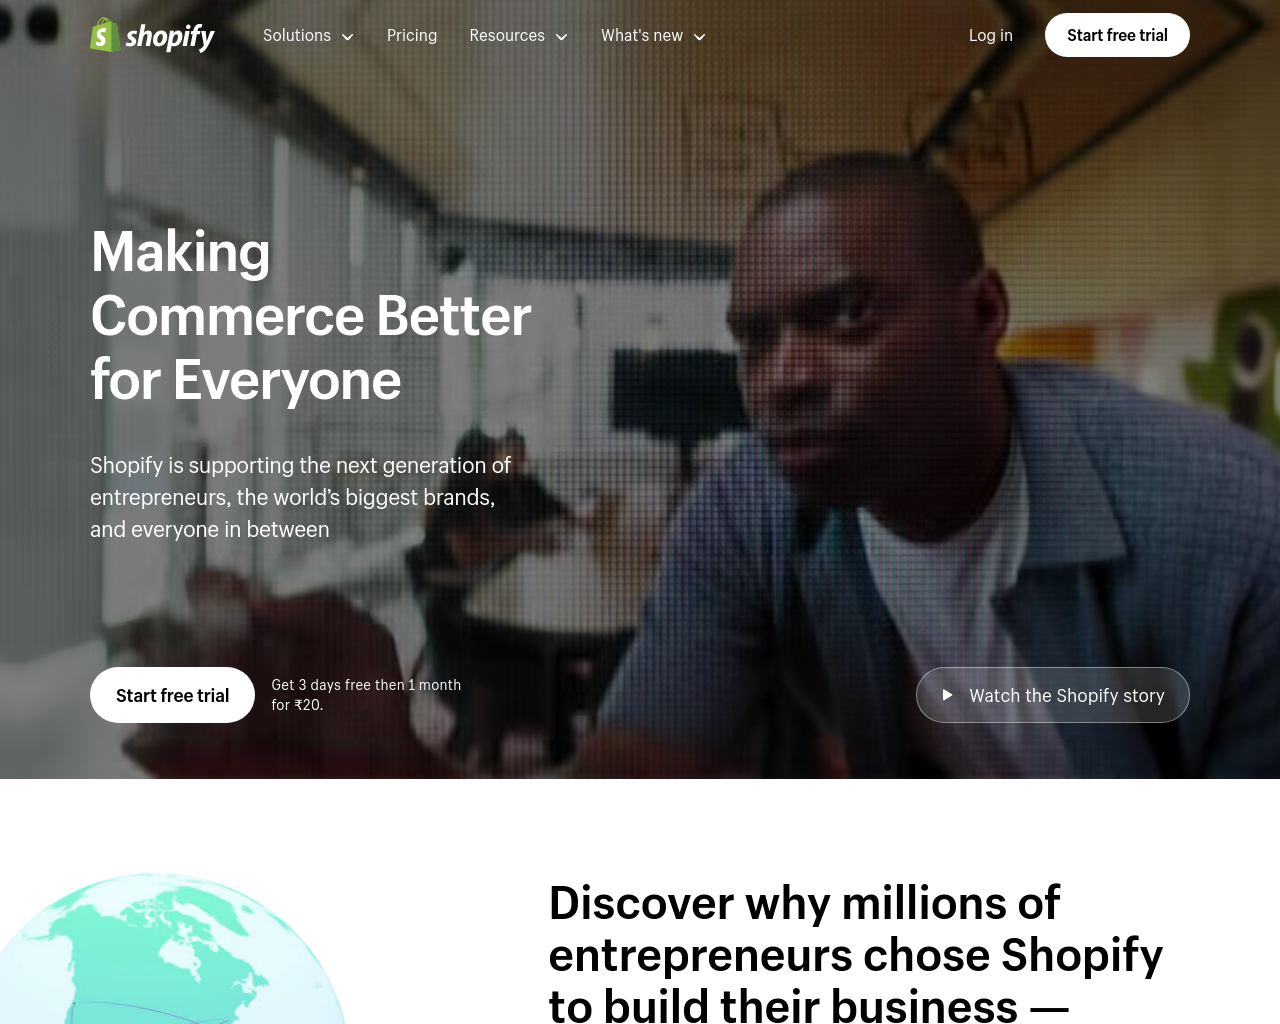 shopify.in